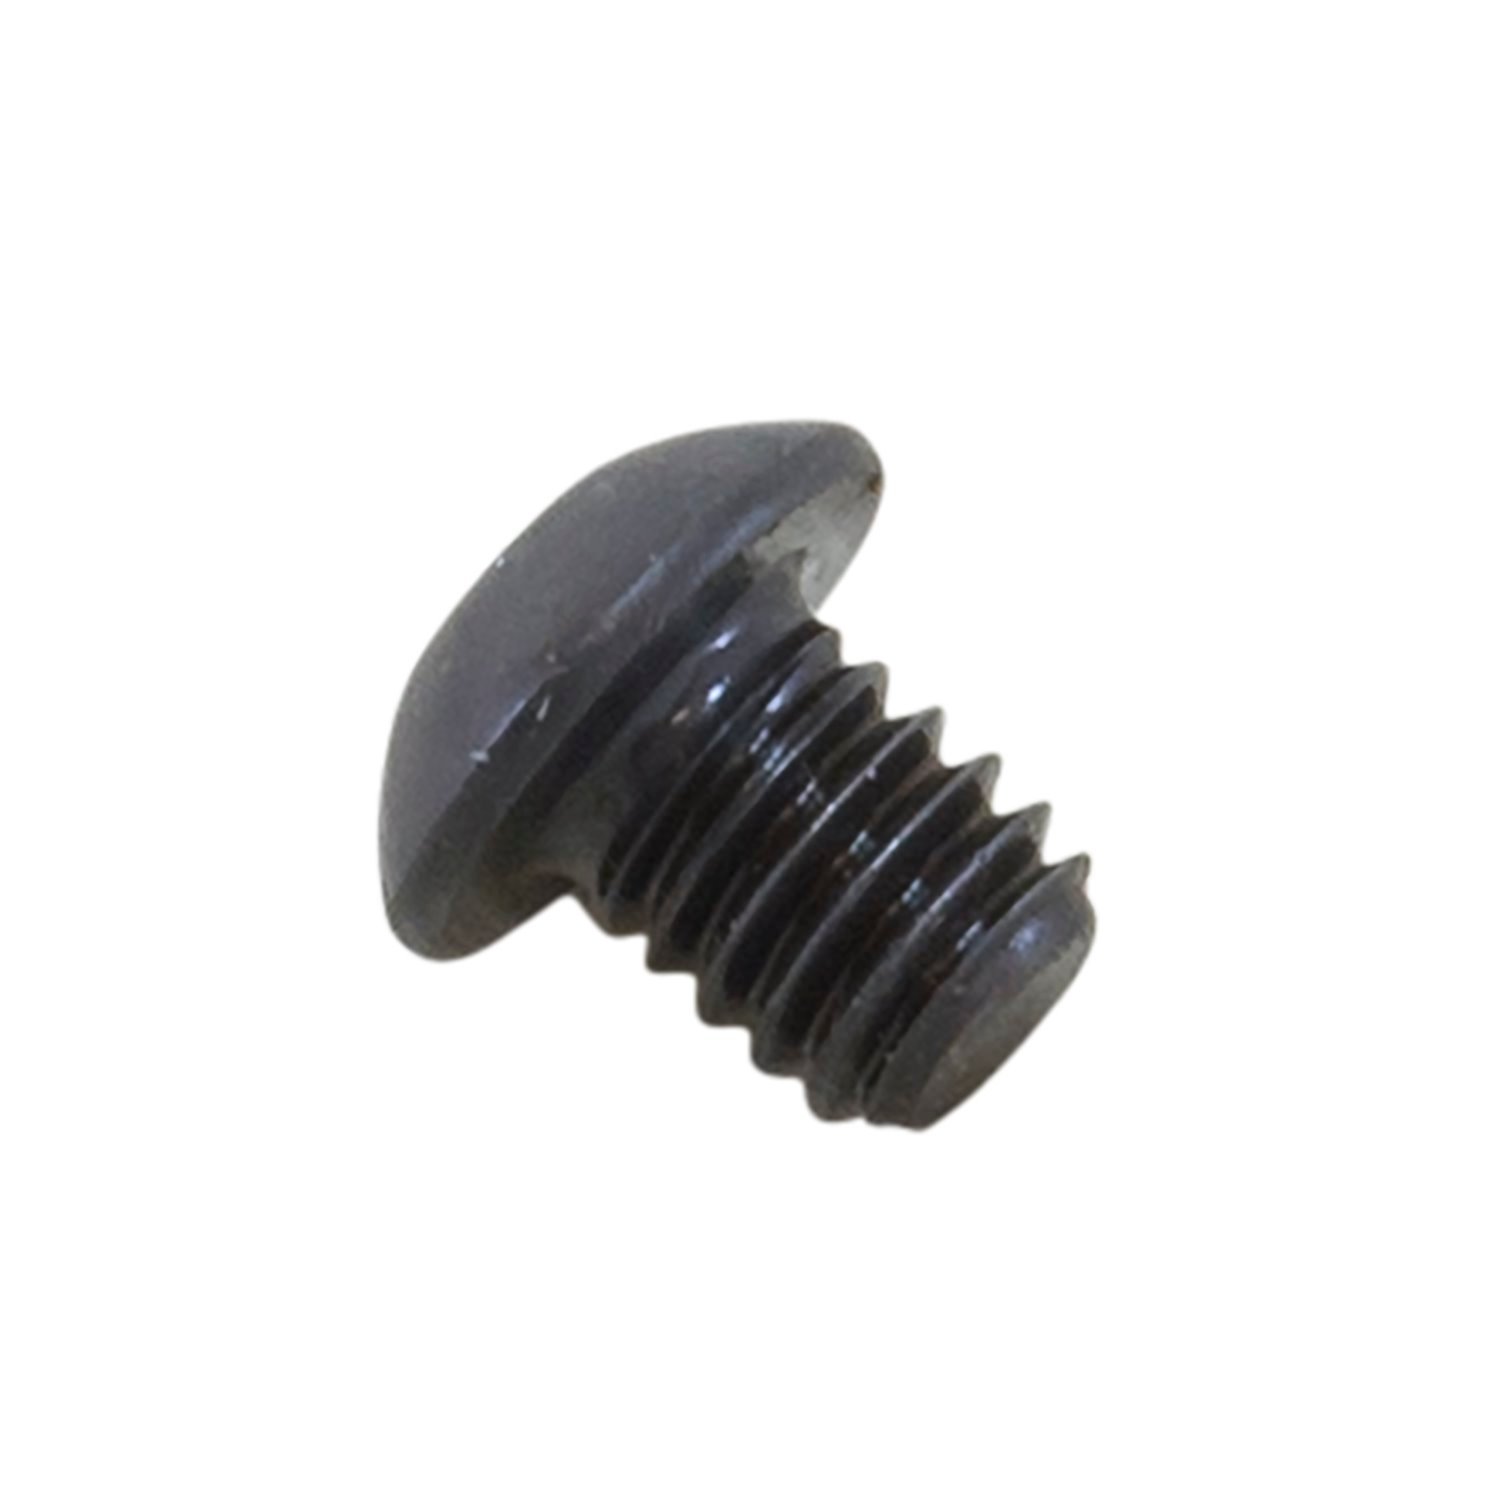 Adjuster Lock Bolt 3.062 in. & 3.250 in. Ford 9 in. Drop Out.